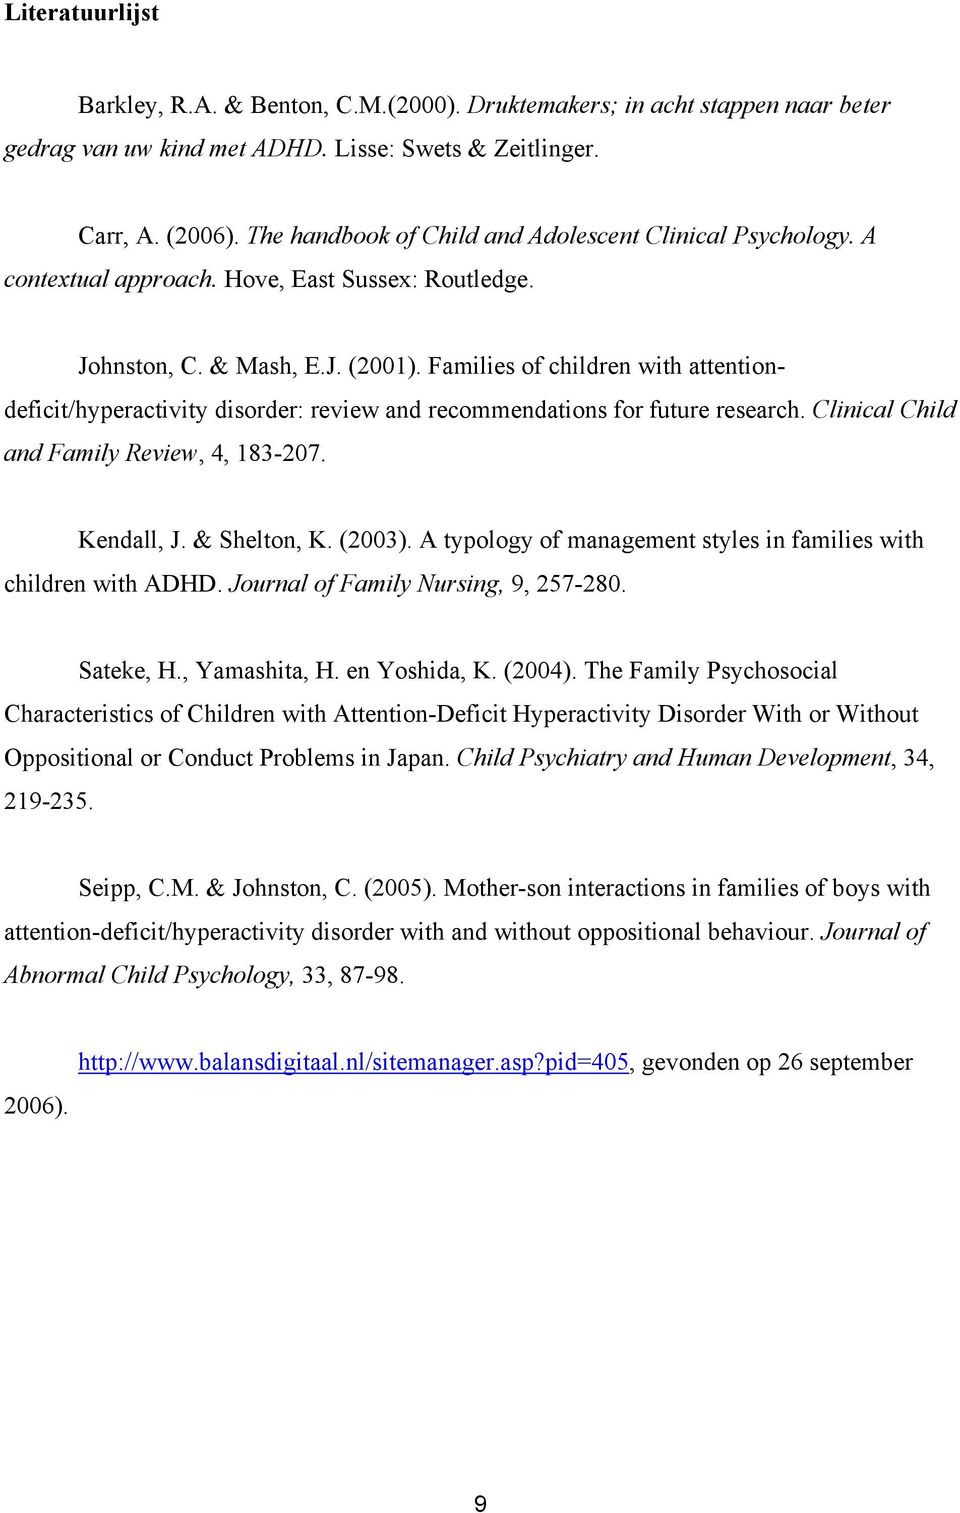 Families of children with attentiondeficit/hyperactivity disorder: review and recommendations for future research. Clinical Child and Family Review, 4, 183-207. Kendall, J. & Shelton, K. (2003).